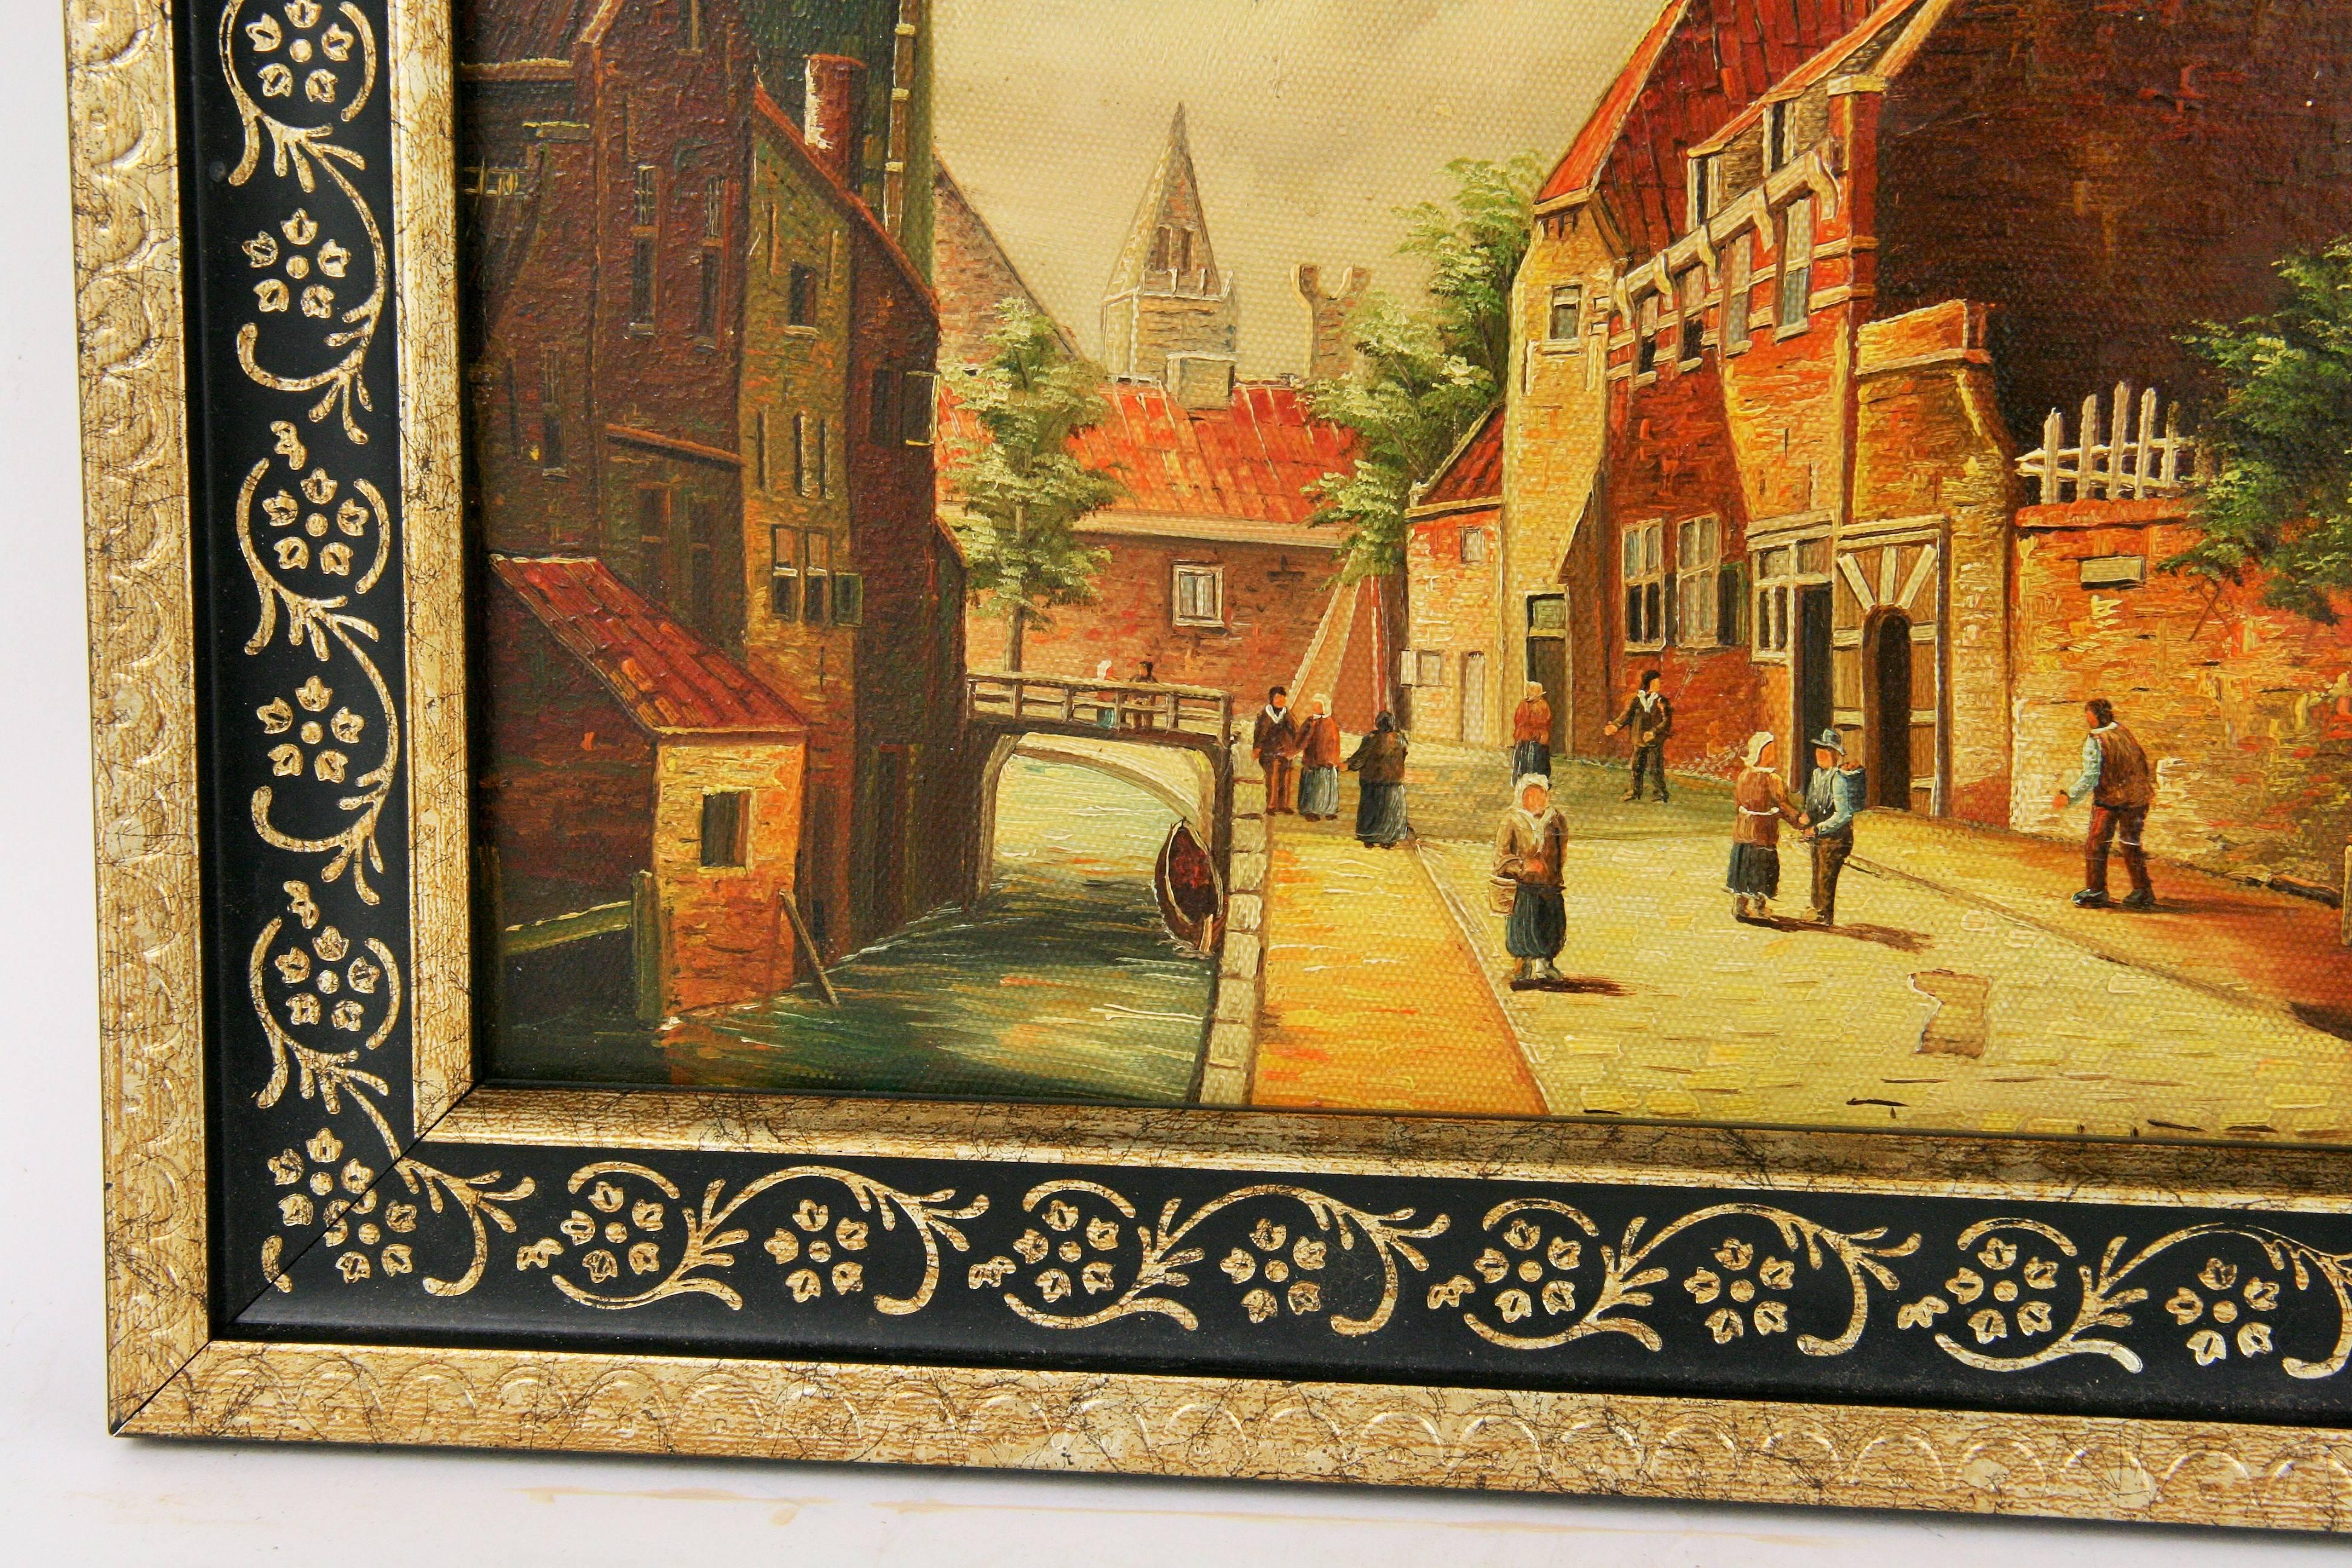 #5-2554 Impressionistic style oil painting on canvas set in a custome gilt-black wood frame.
Artist unknown